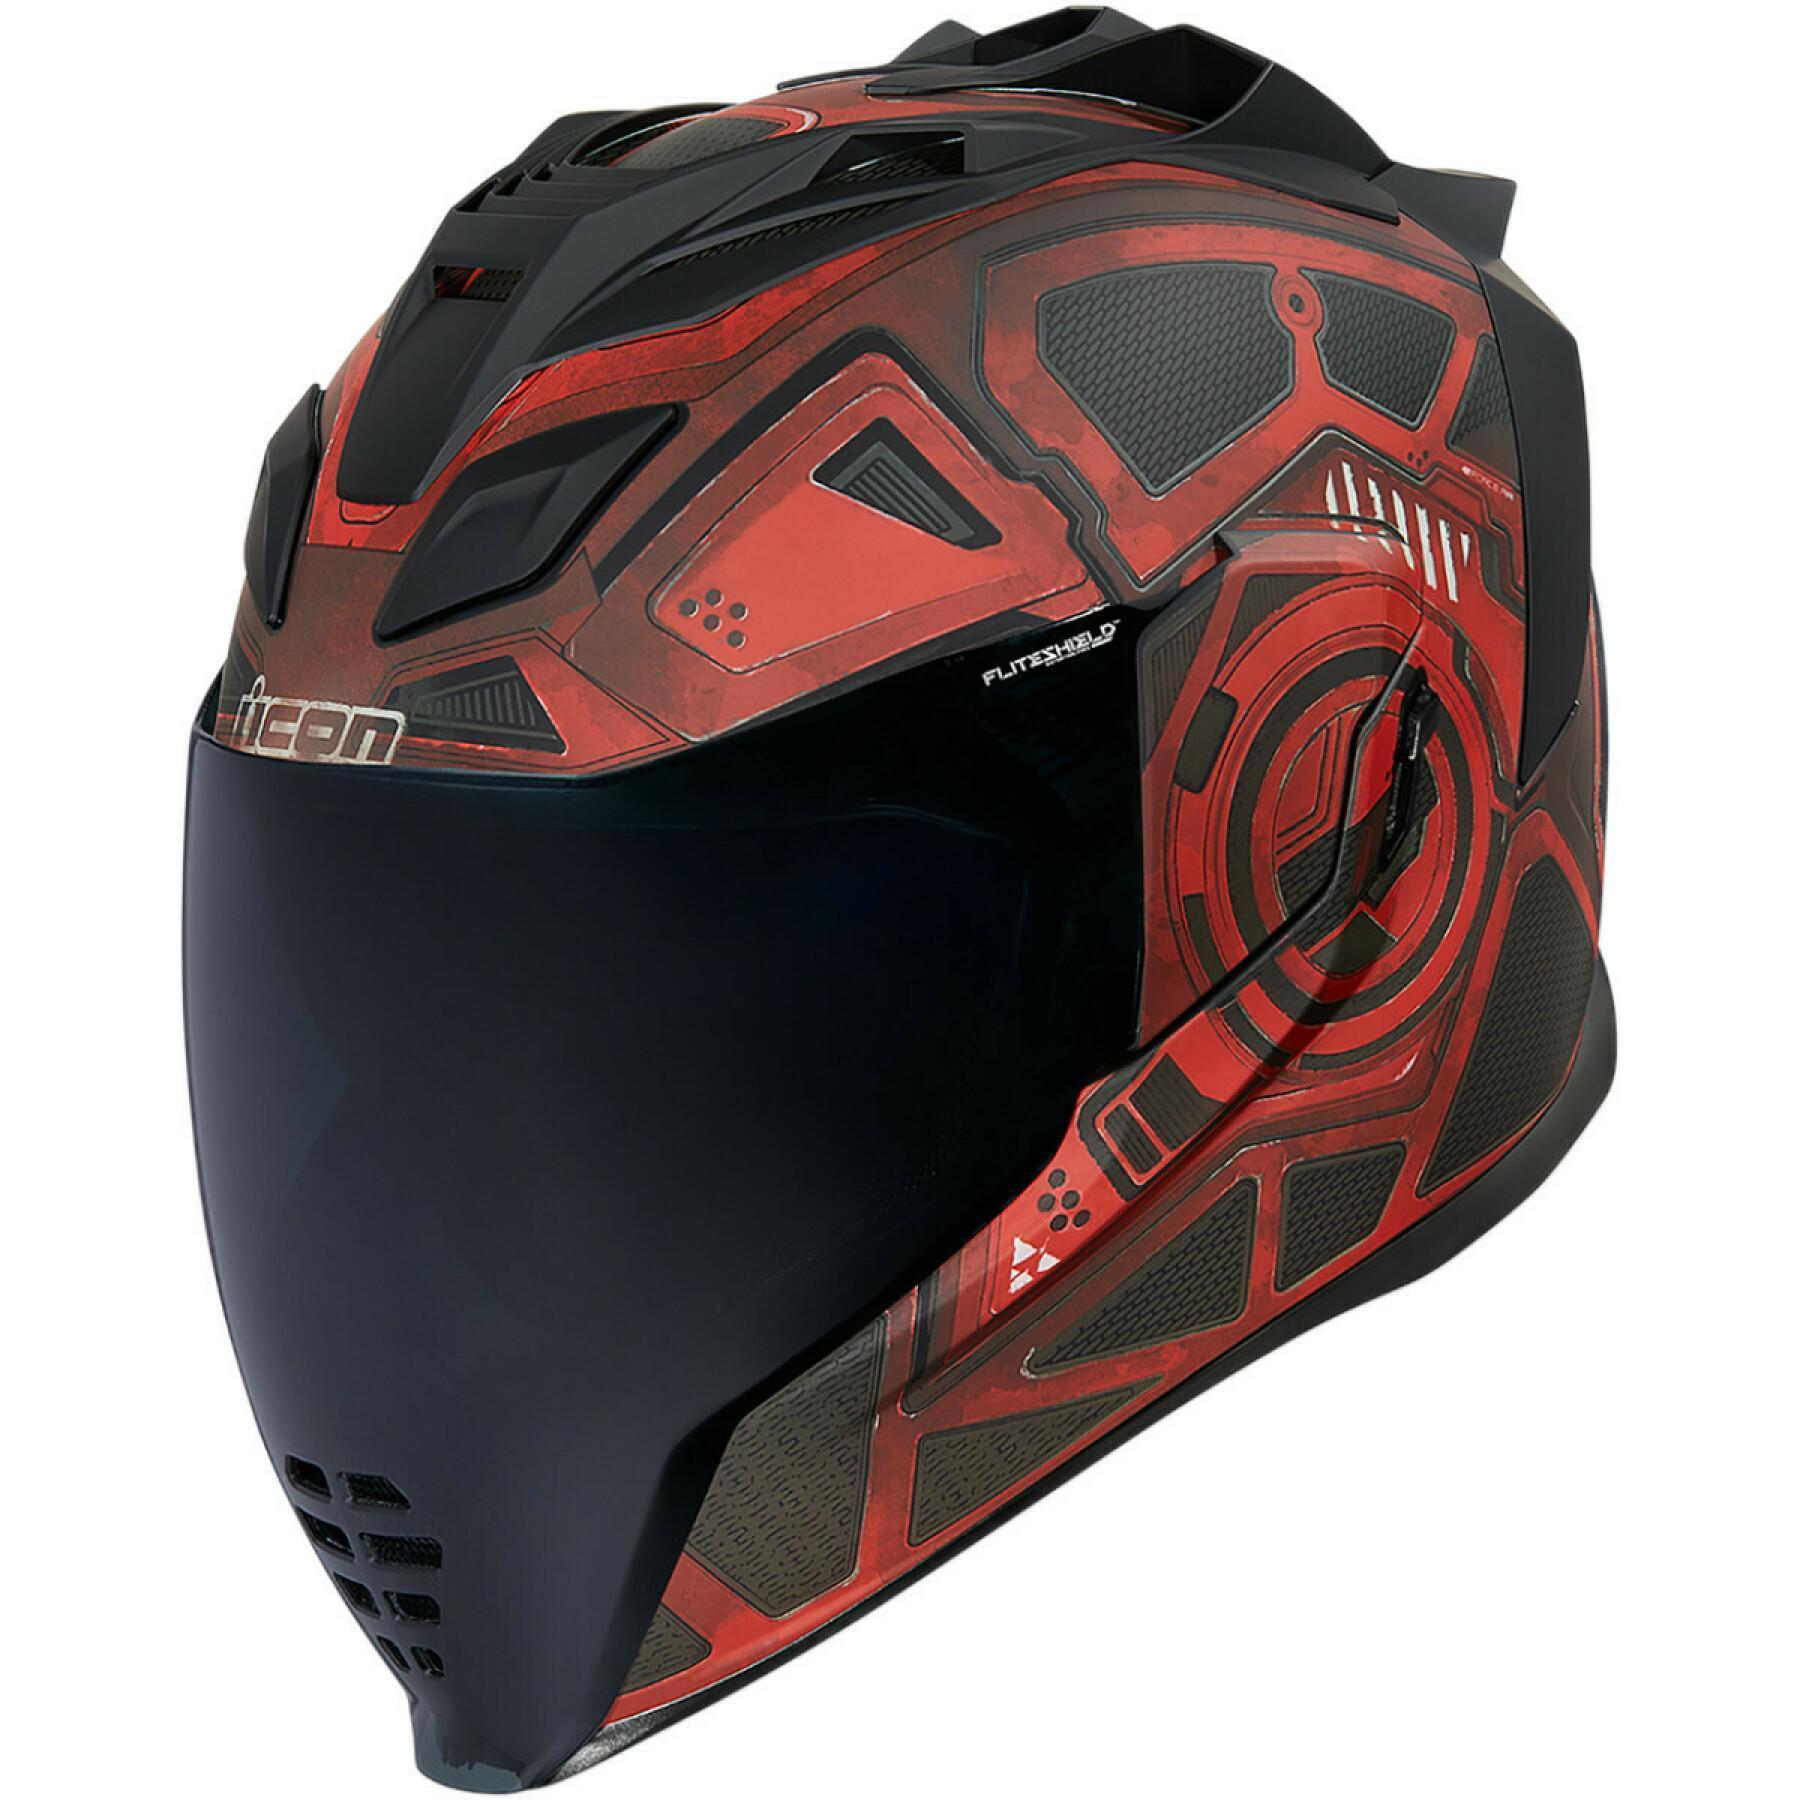 Full face motorcycle helmet Icon aflt chain